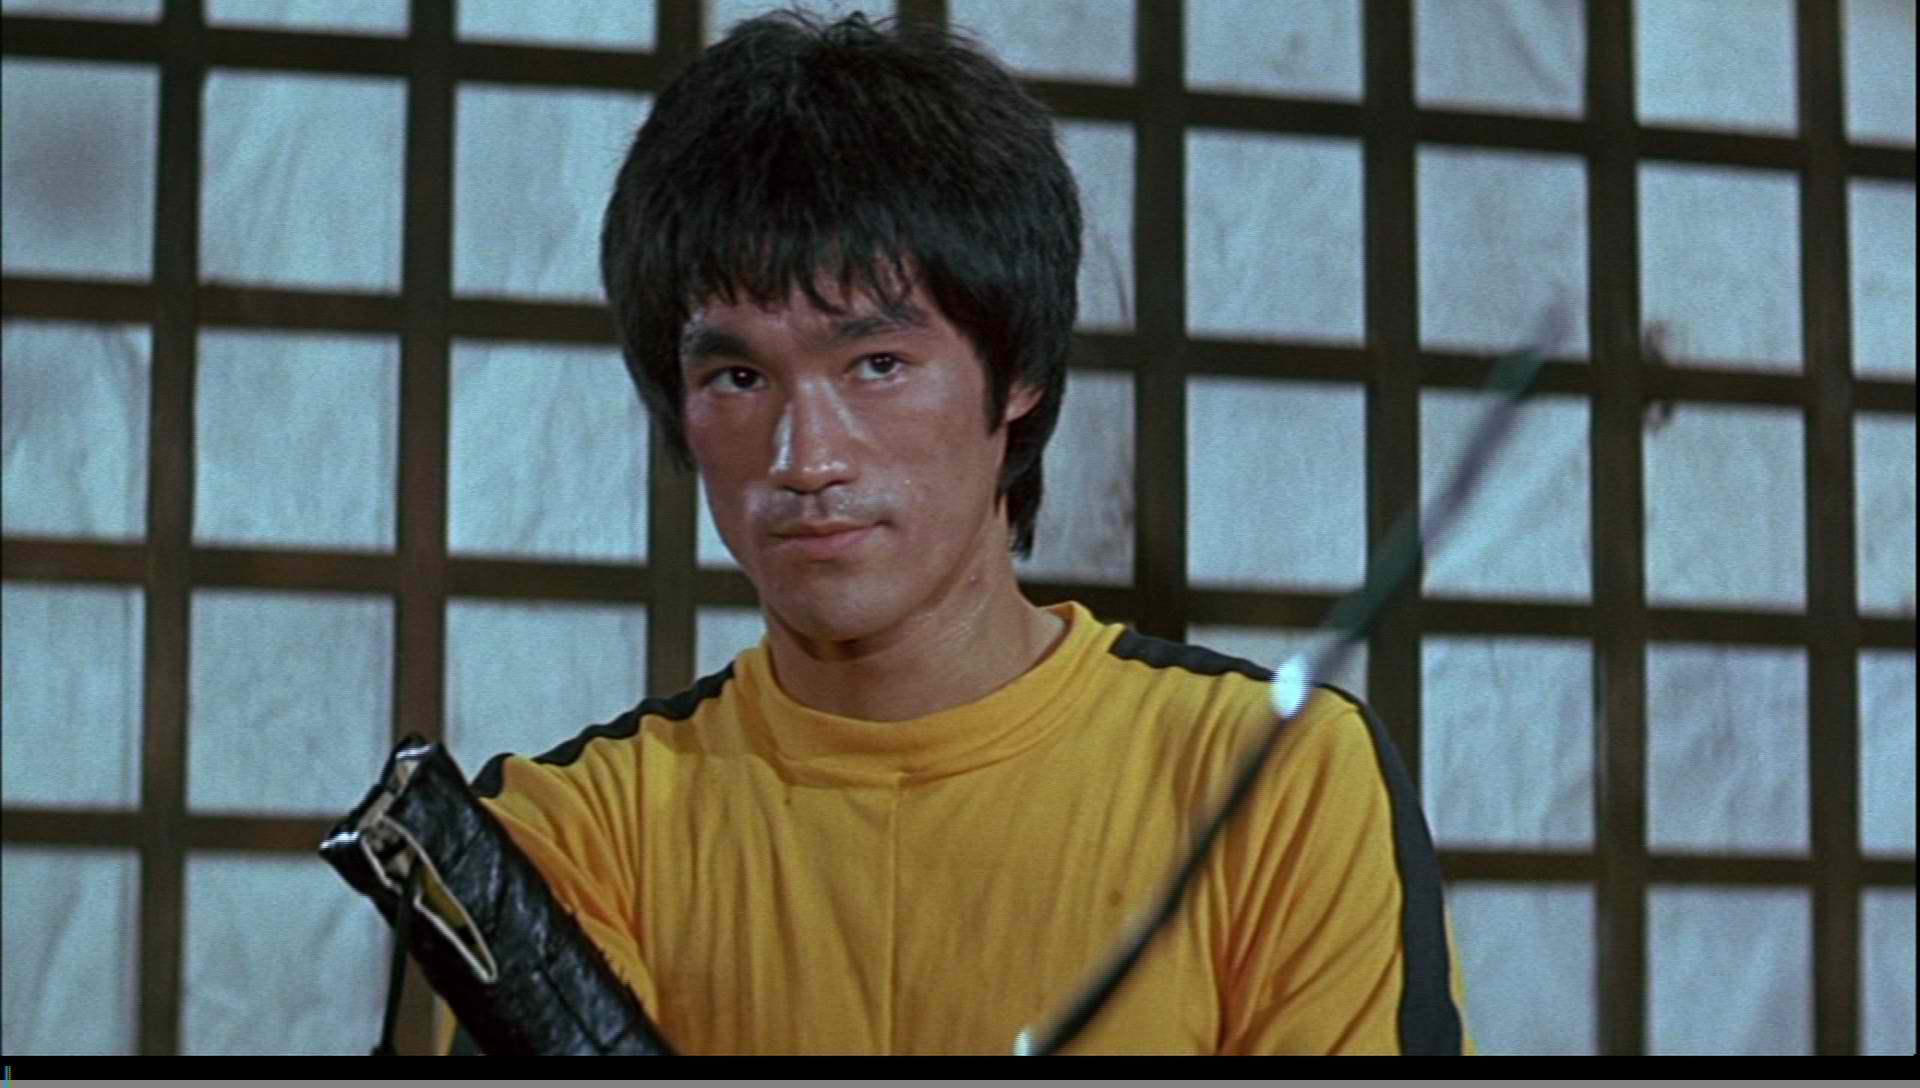 bruce lee a warrior's journey full movie